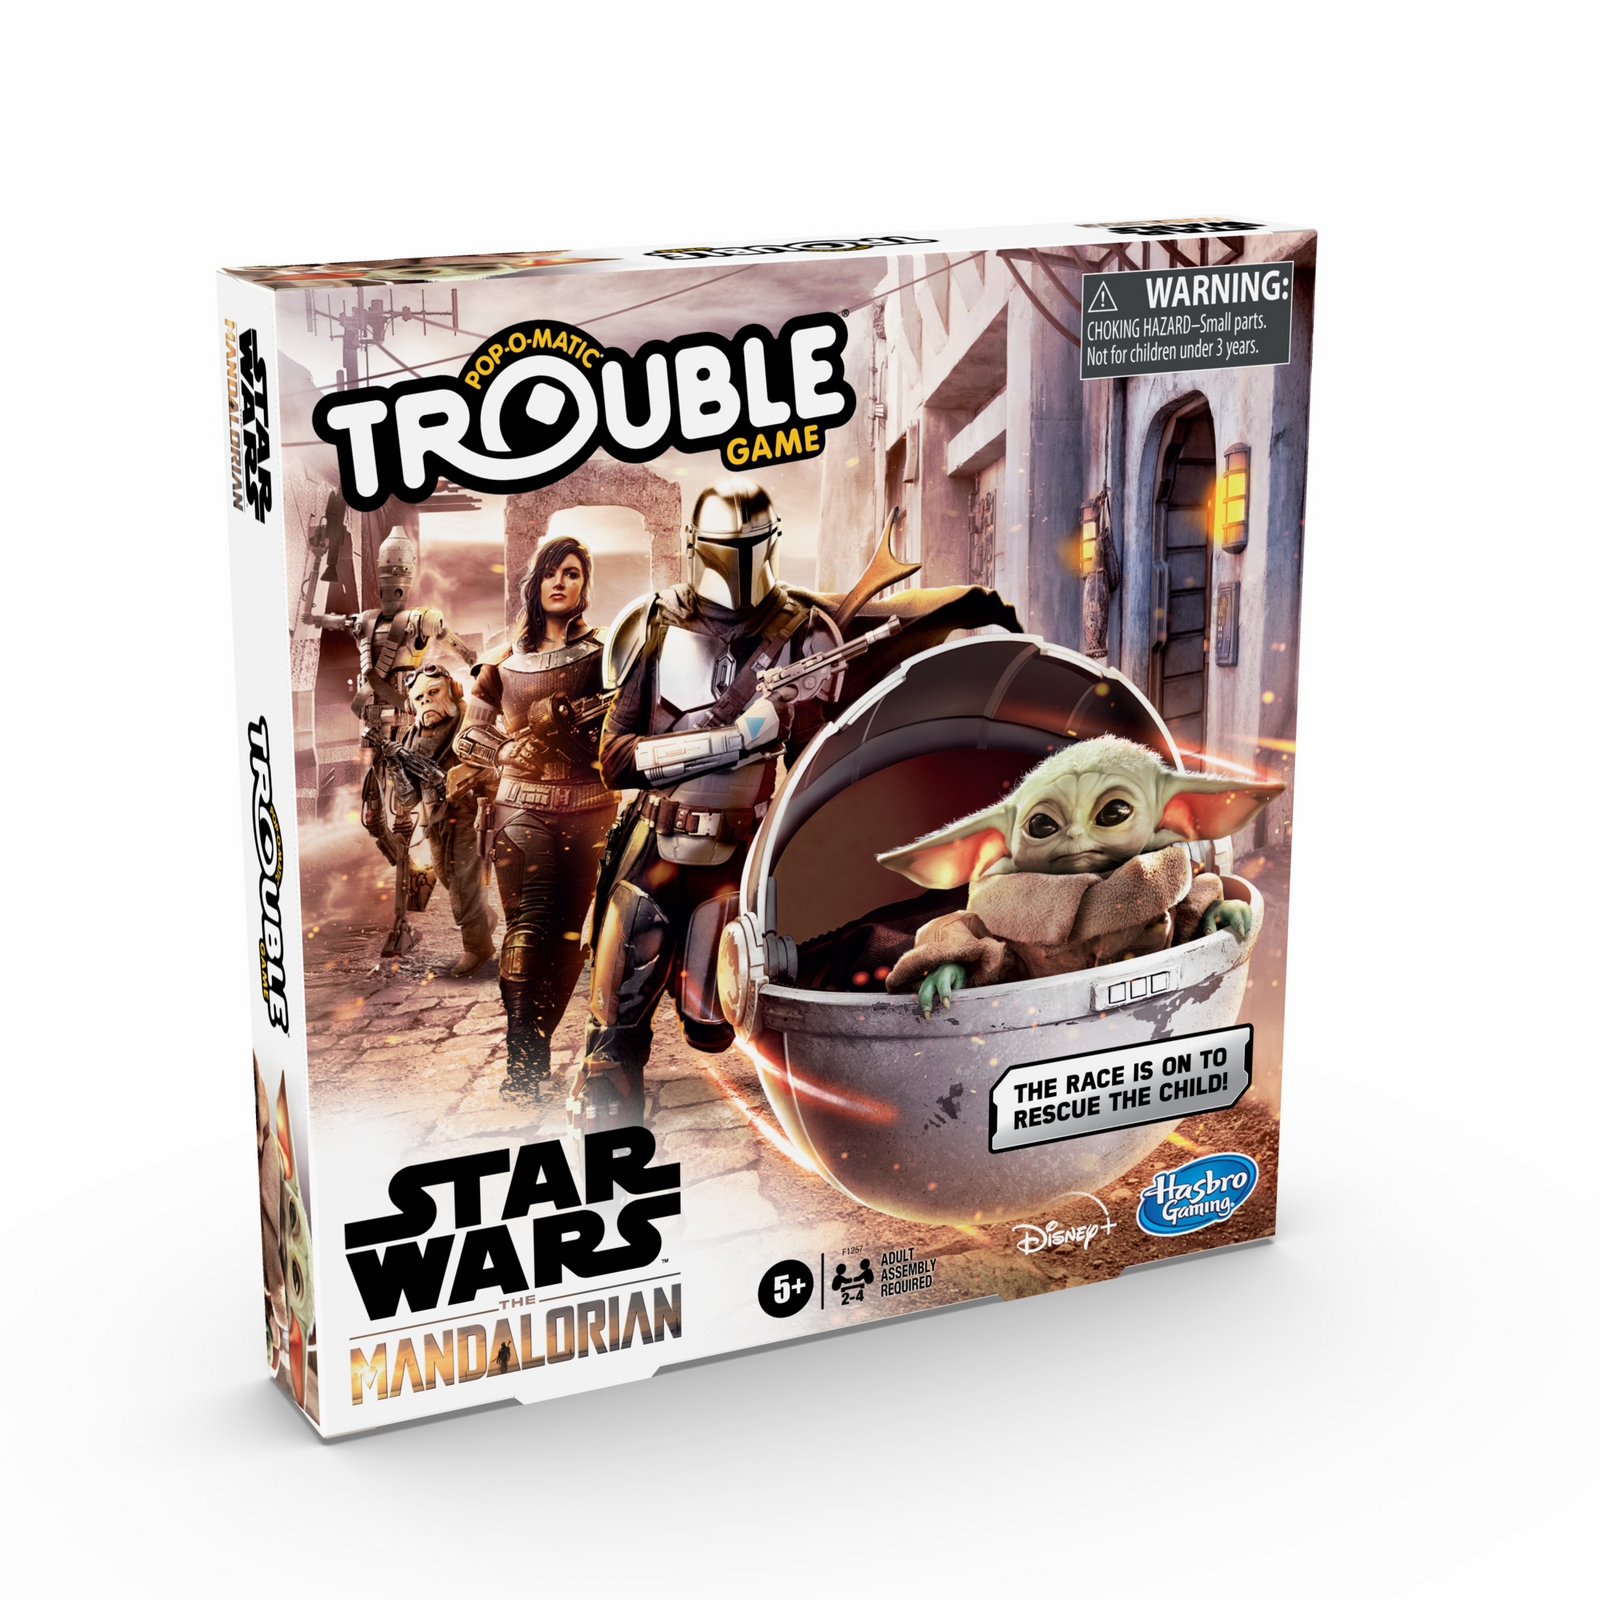 TROUBLE-STAR-WARS-THE-MANDALORIAN-EDITION-Game-in-pck-1.jpg